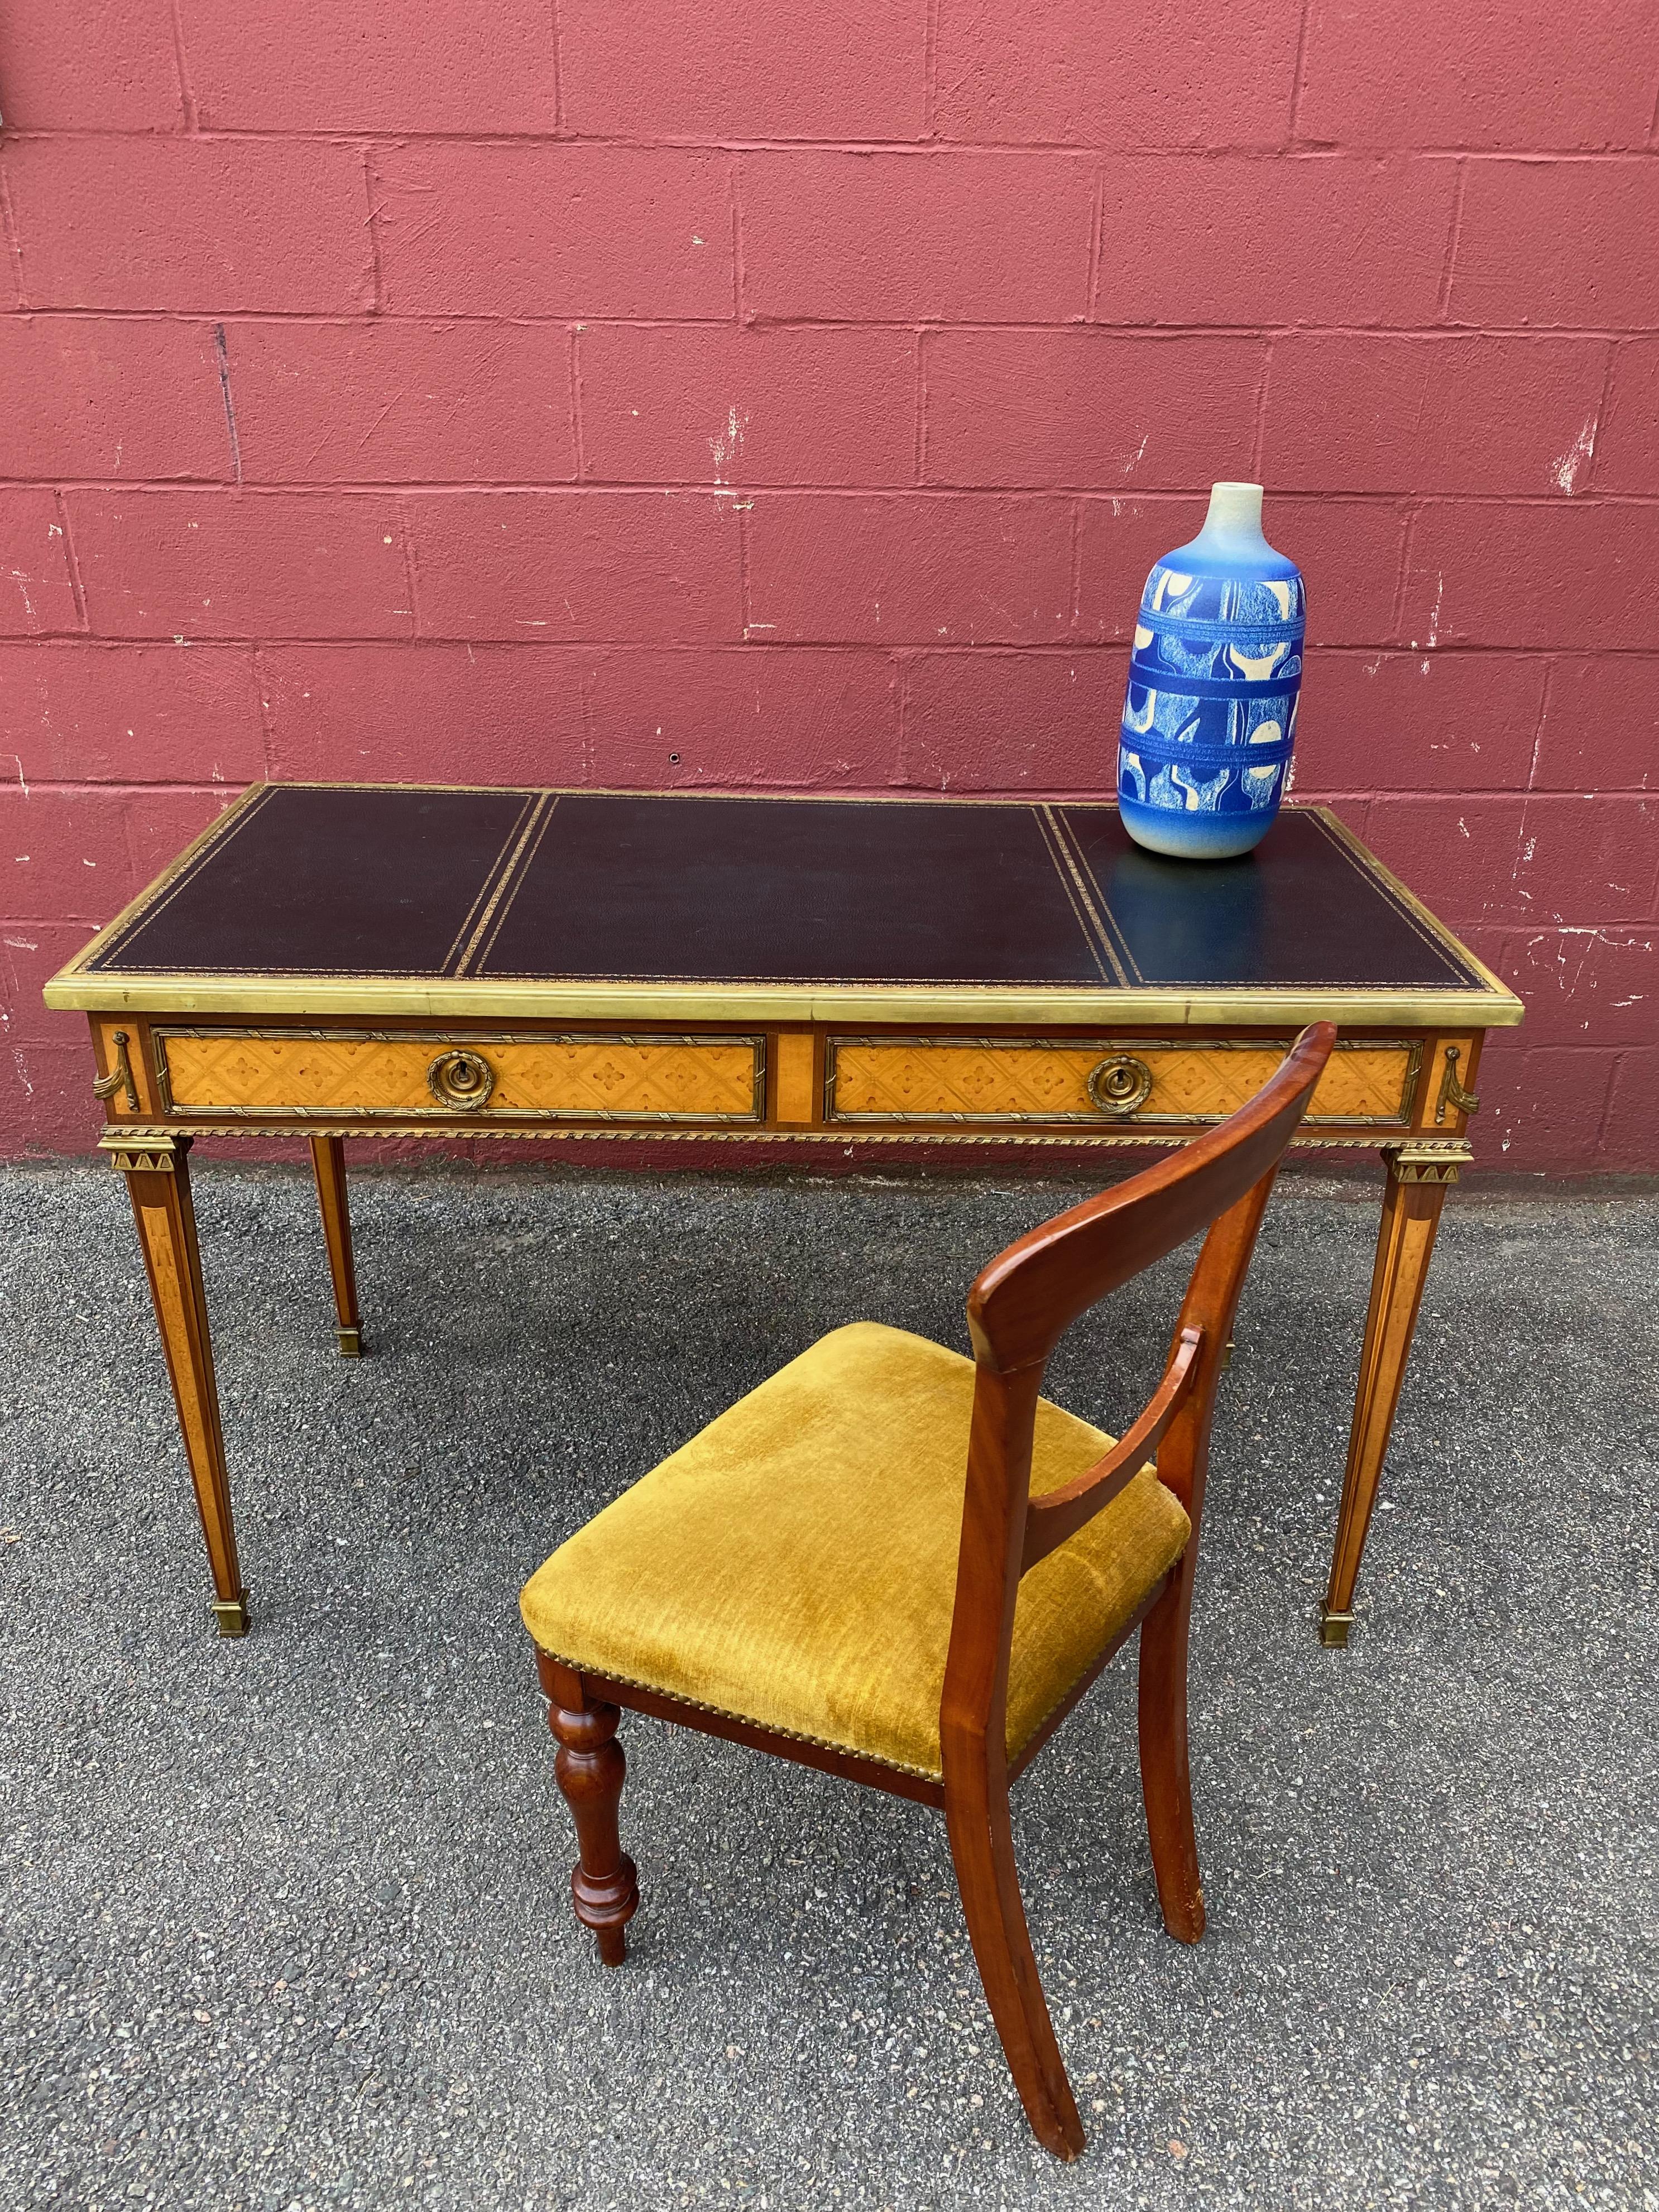 A small ladies writing desk with 2 drawers and pull out tablets on both ends. The black tooled leather top is surrounded by a stepped brass frame. The rich wood is a combination of satin wood and what appears to be mahogany with intricate inlays